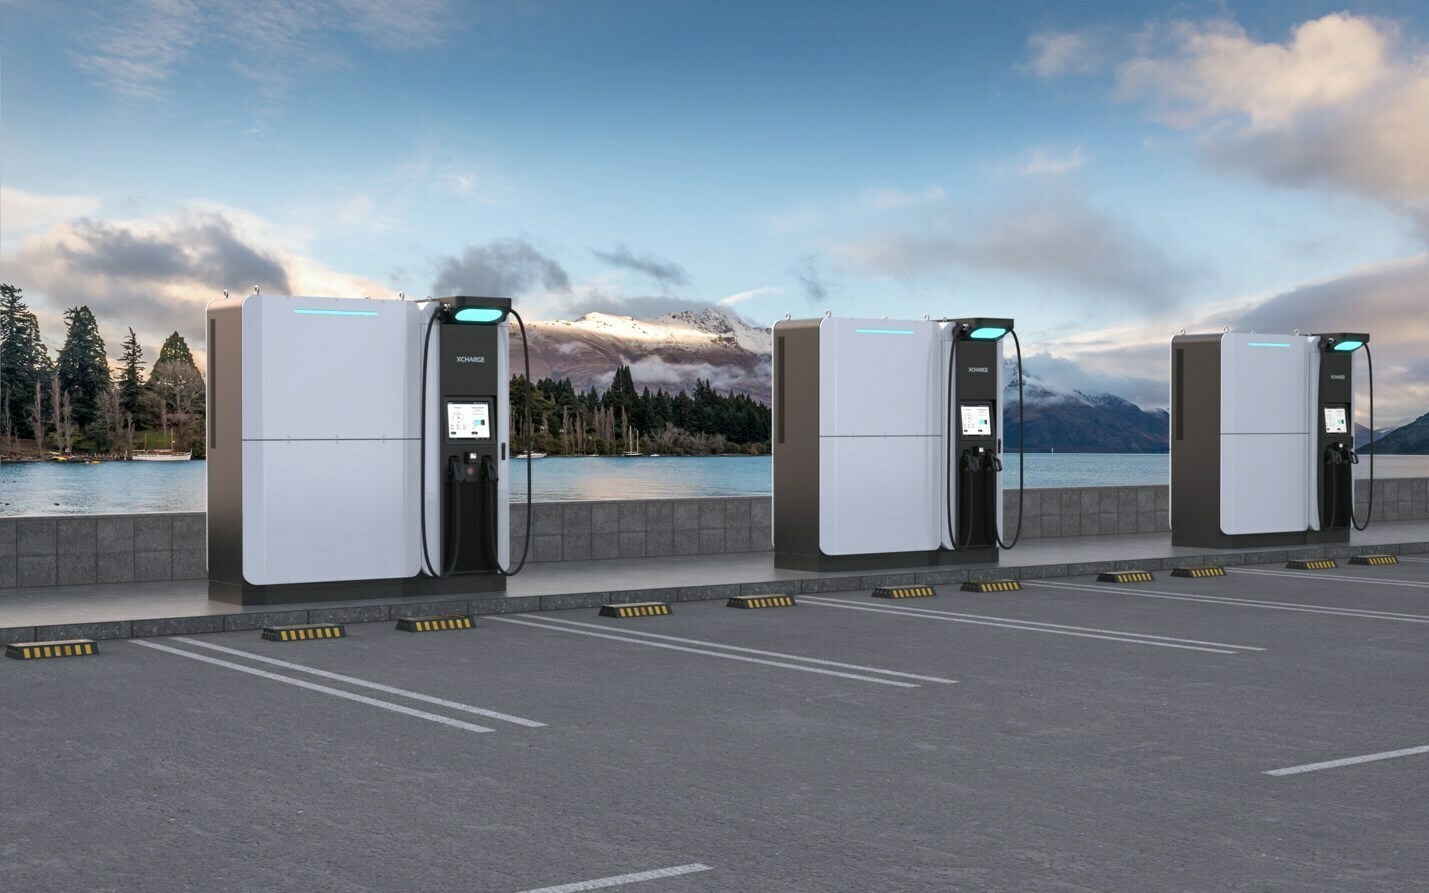 The NZS EV charging solution from XCharge provides more power with less grid input. Photo: XCharge